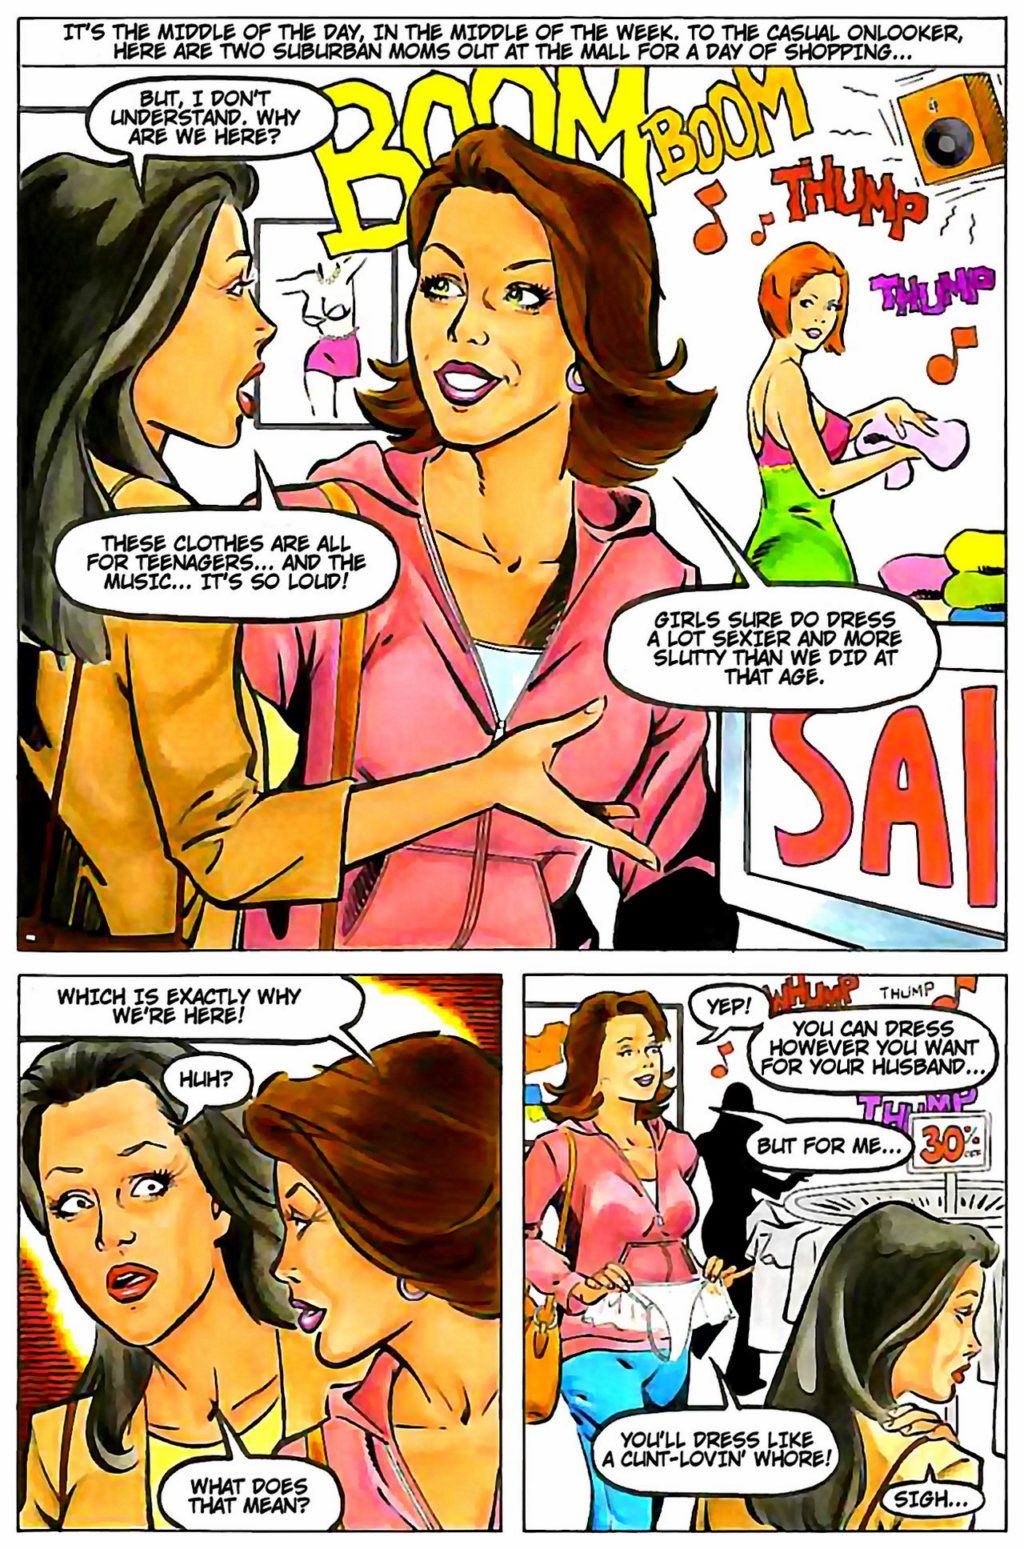 Housewives at Play-17 page 2